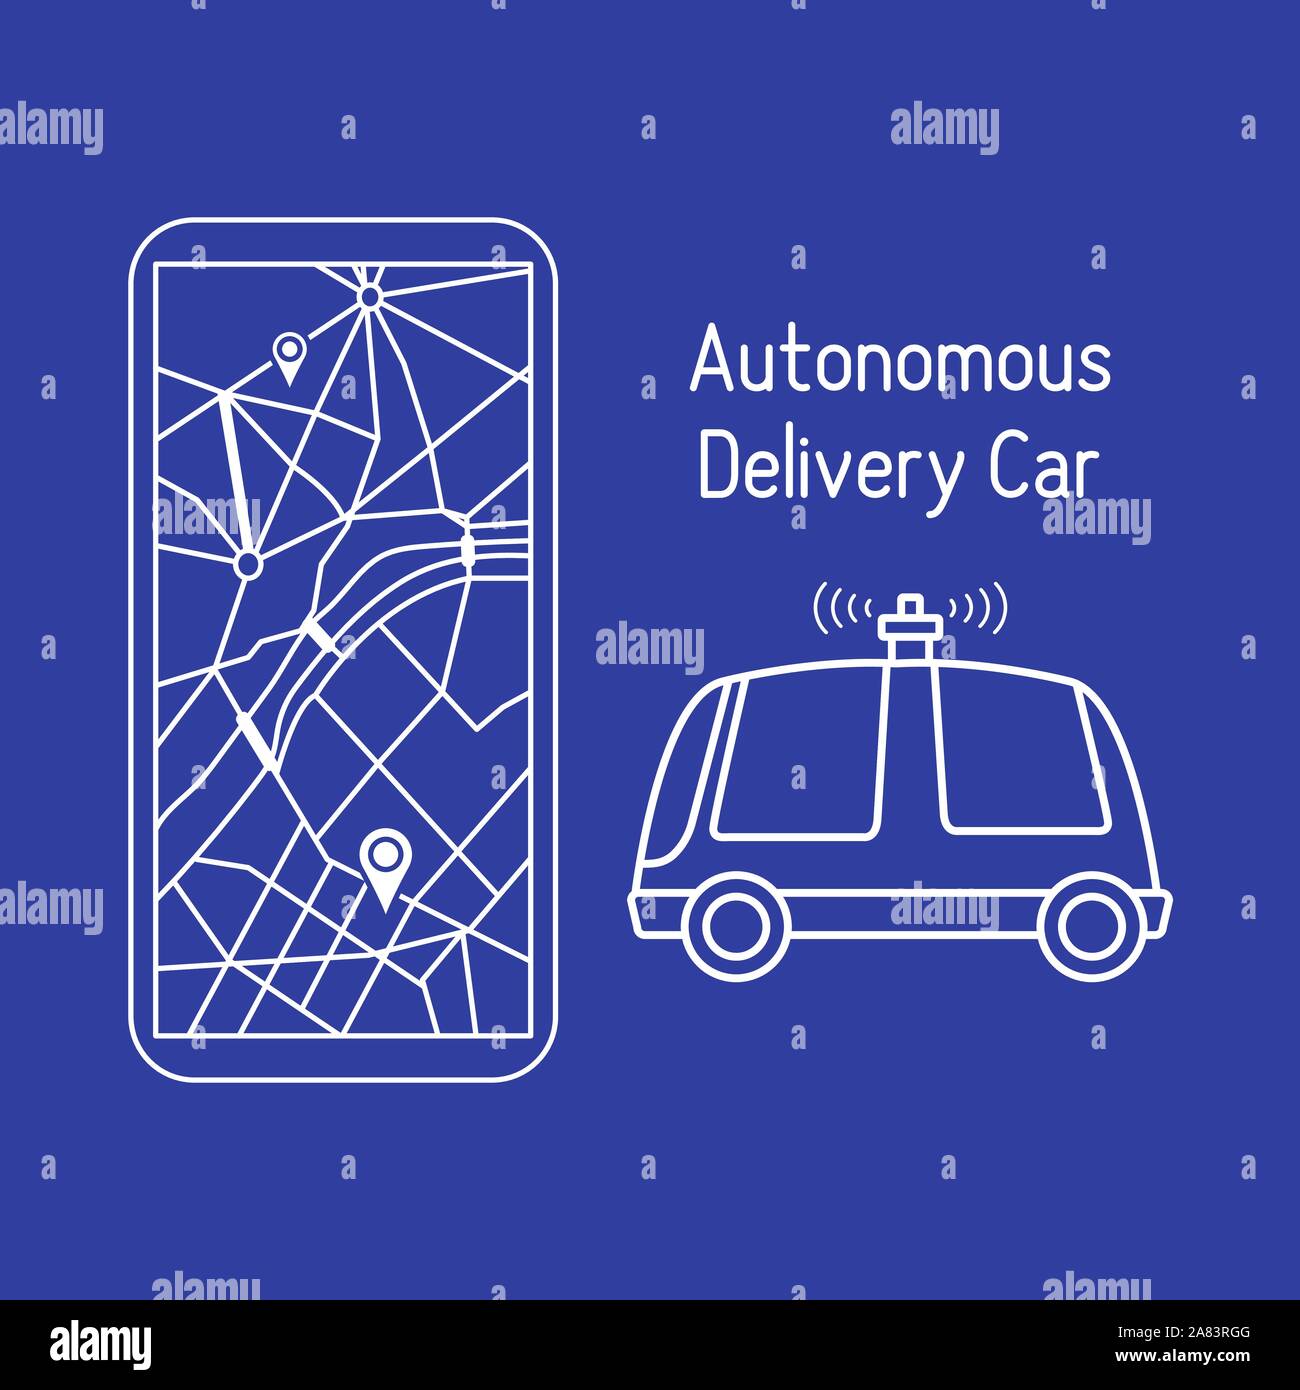 Vector illustration with self-driving car, automated car, autonomous vehicle,  driverless car. Navigation, remote control, tracking transport. Order i Stock Vector